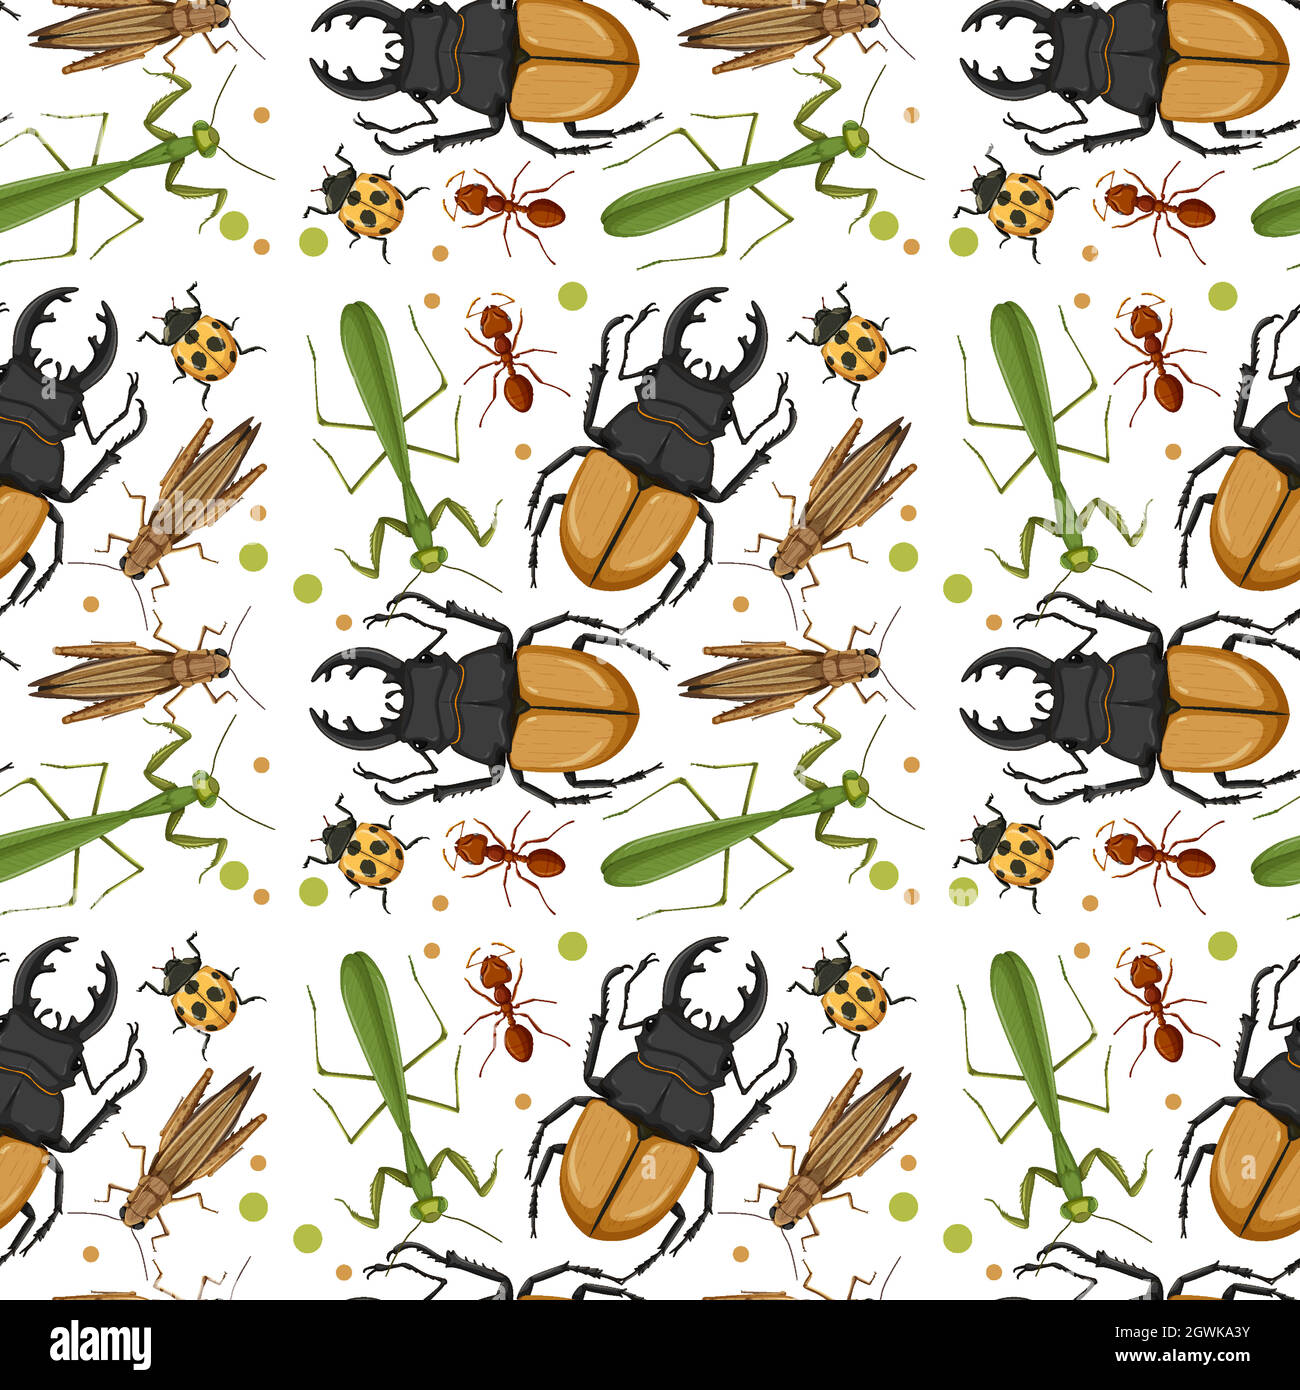 Different insects seamless pattern white background Stock Vector